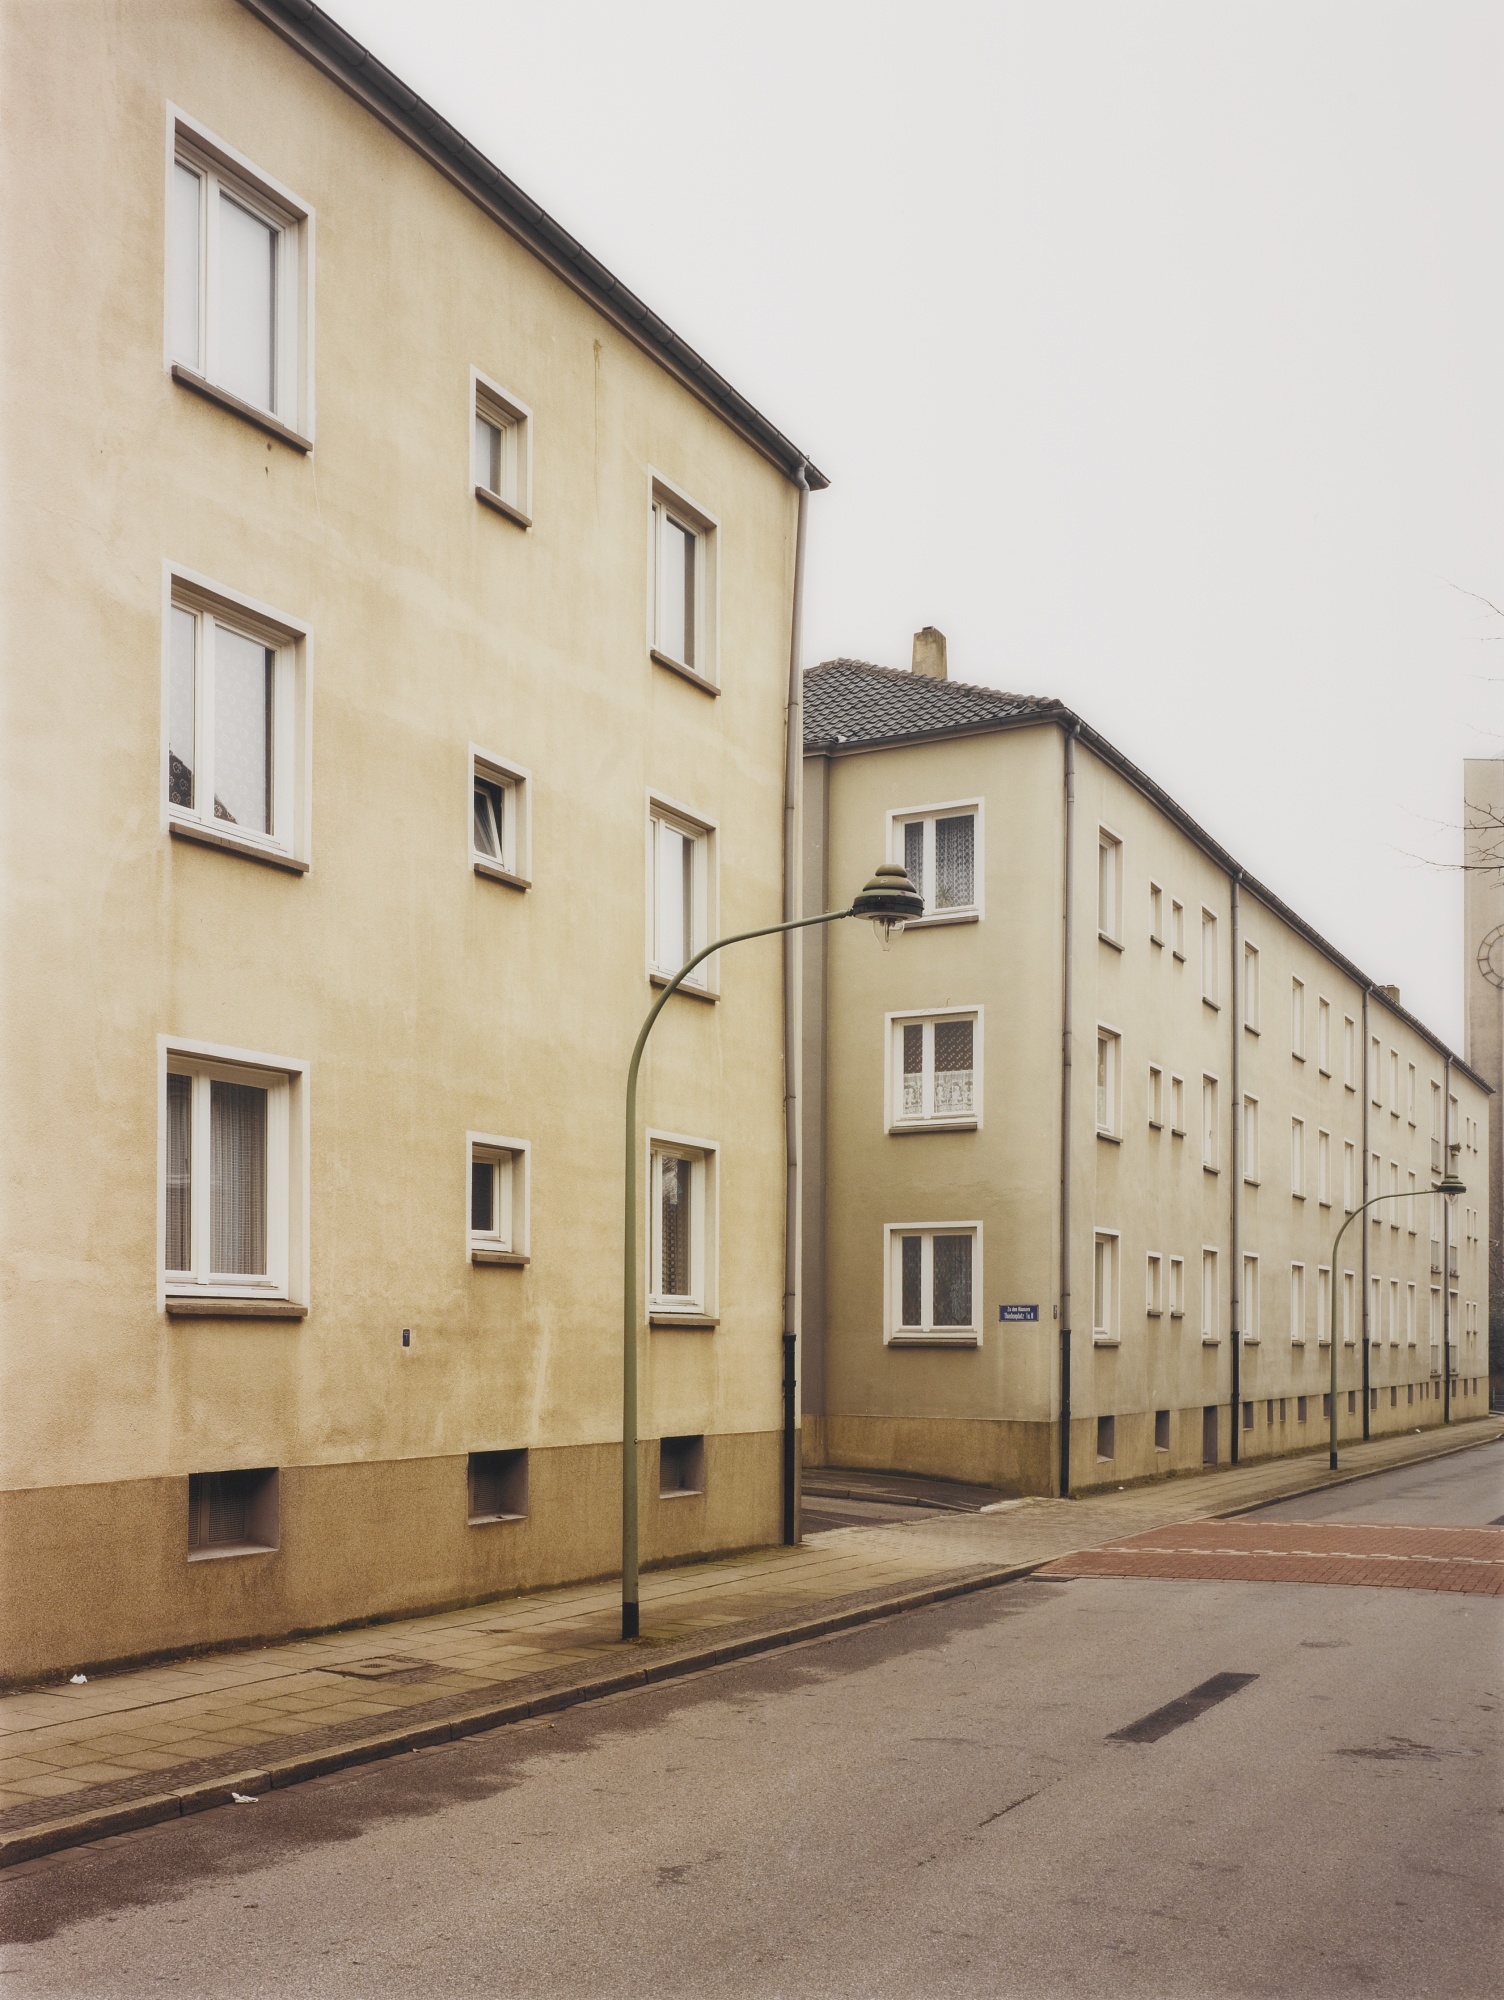 Artwork by Thomas Ruff, HAUS NR. 7 I, Made of chromogenic color print mounted with Diasec face